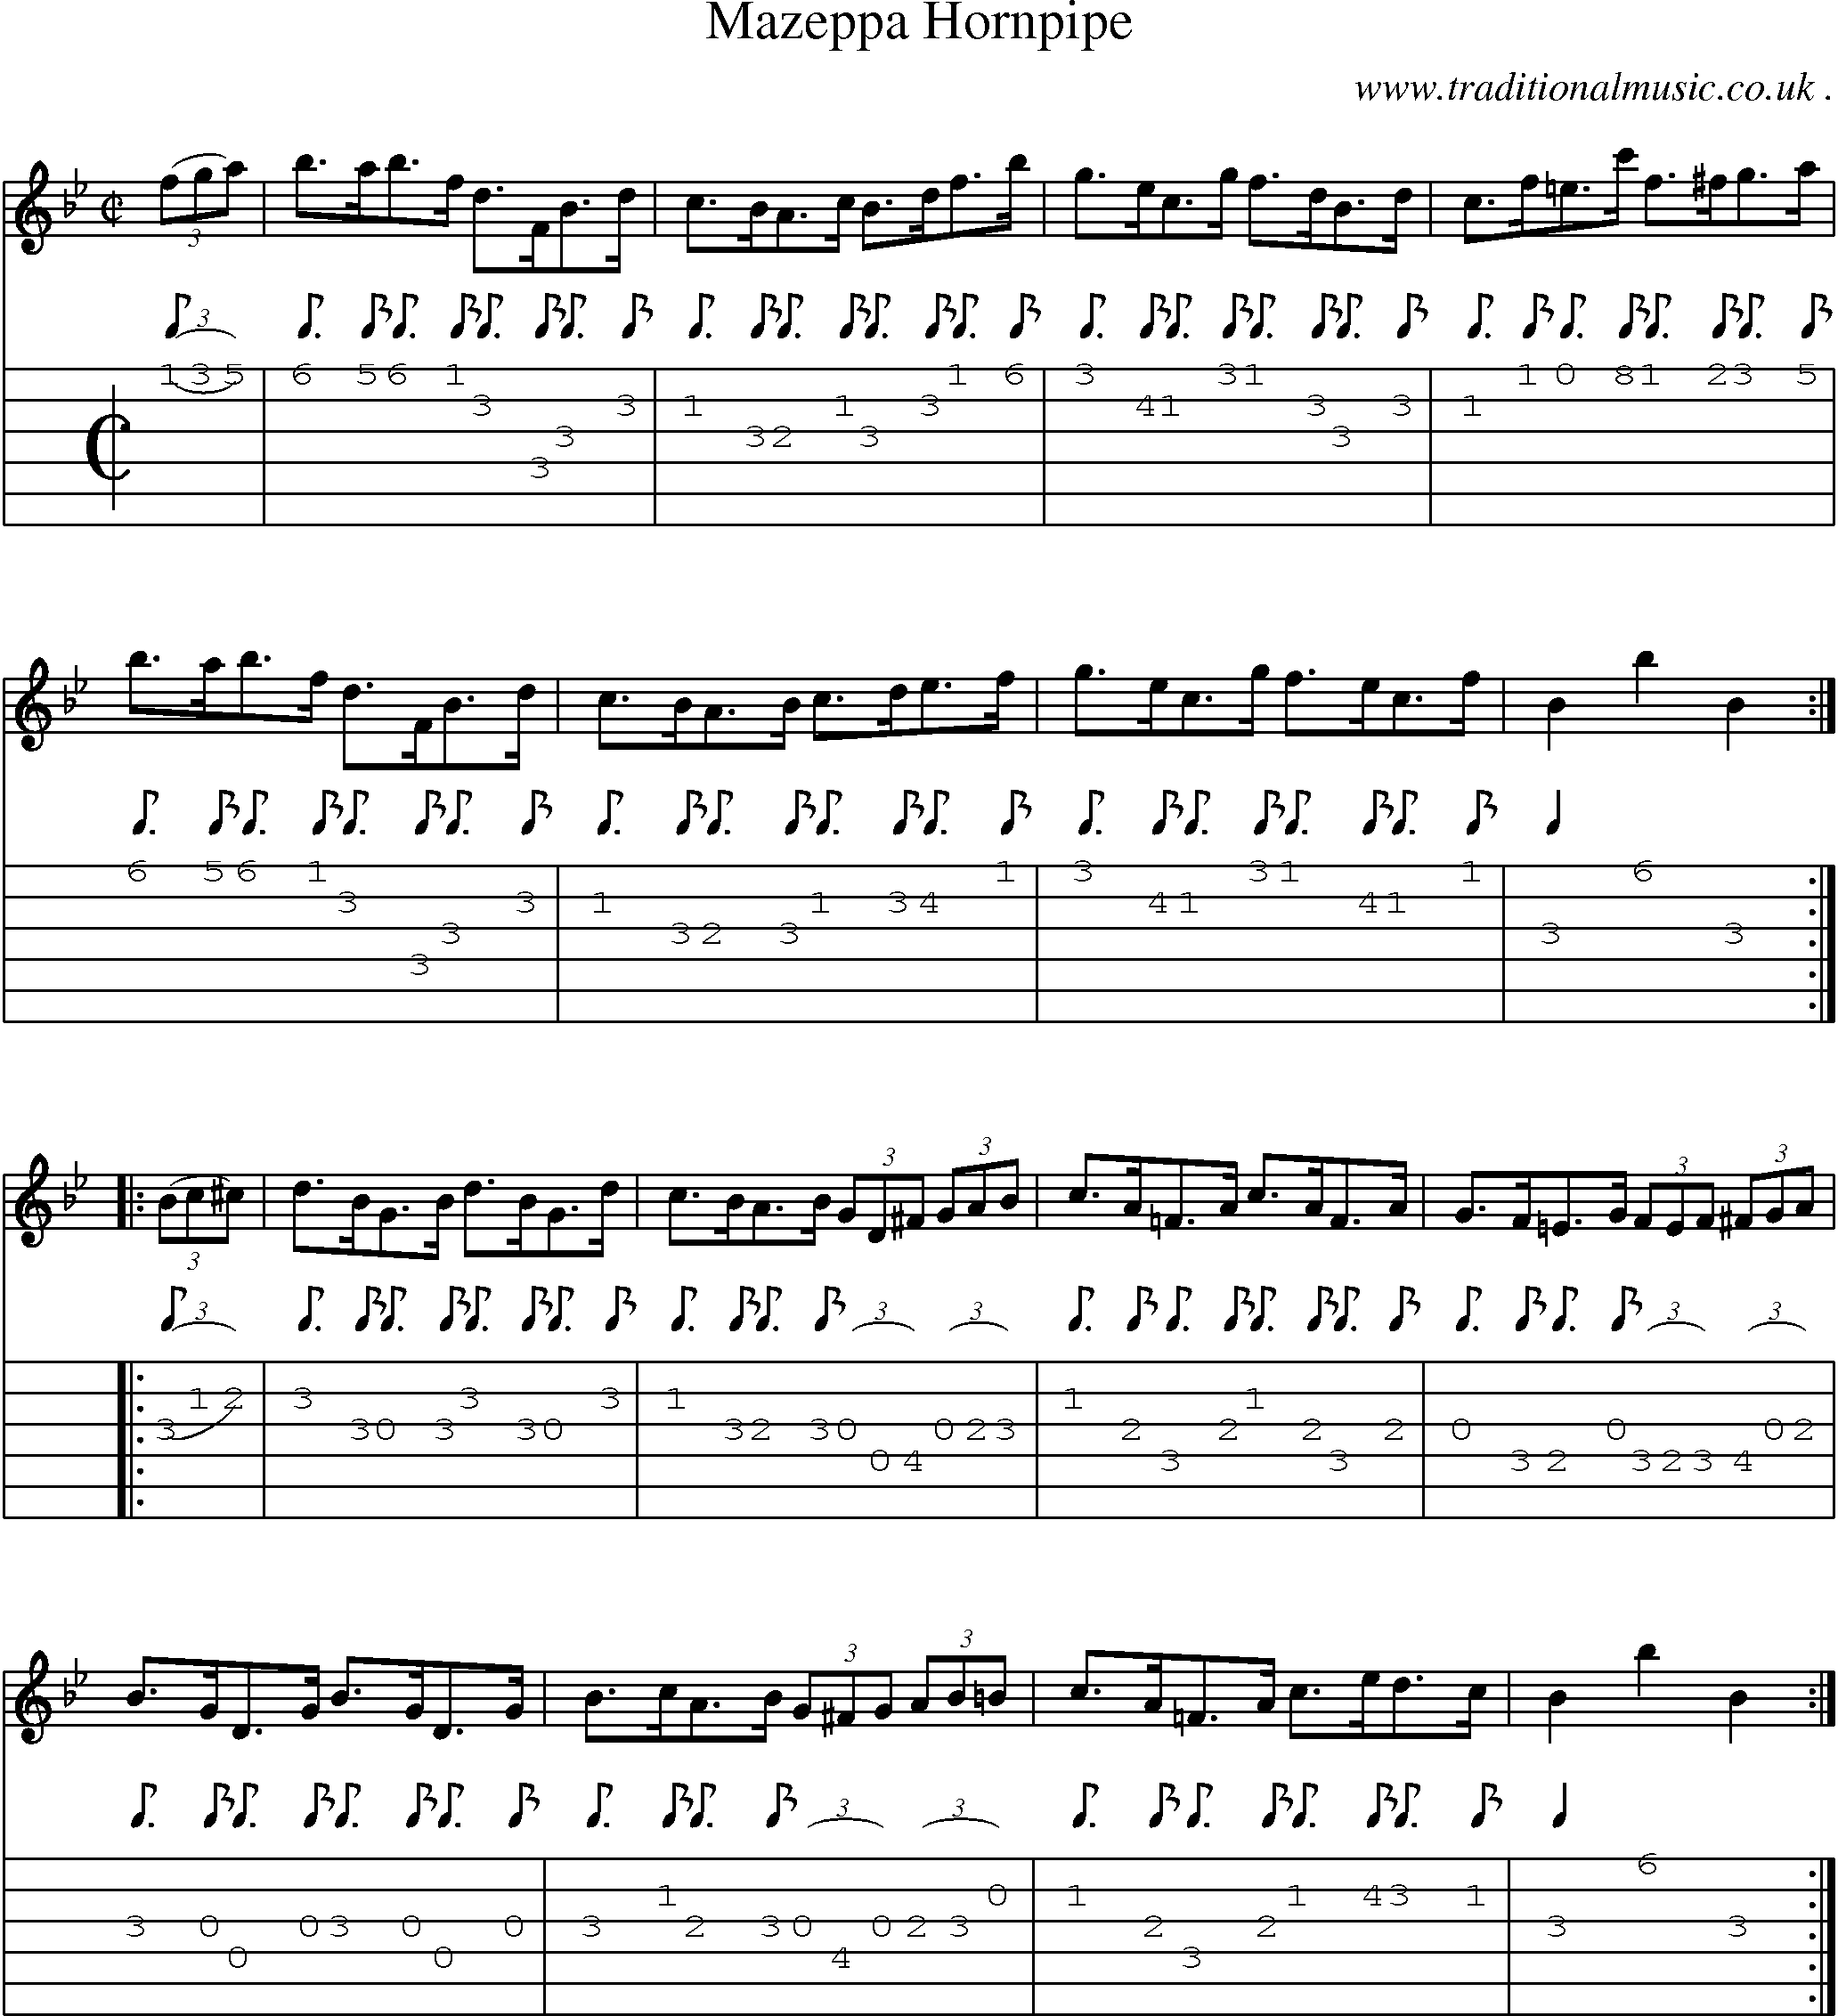 Sheet-Music and Guitar Tabs for Mazeppa Hornpipe